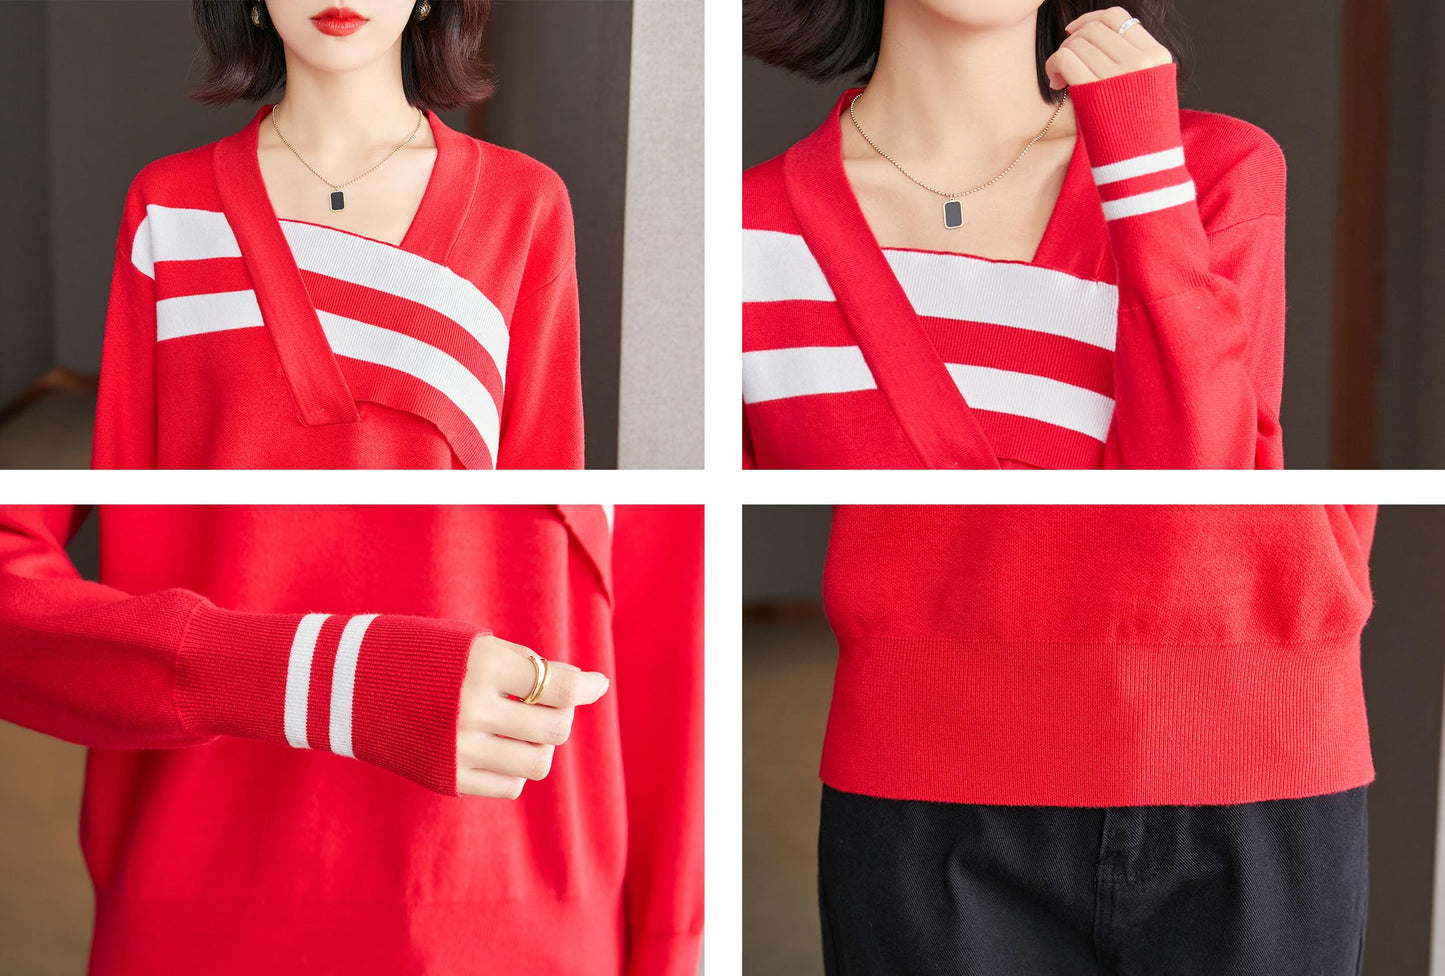 Women's Fall Striped Knit Sweater V Neck Casual T Shirts